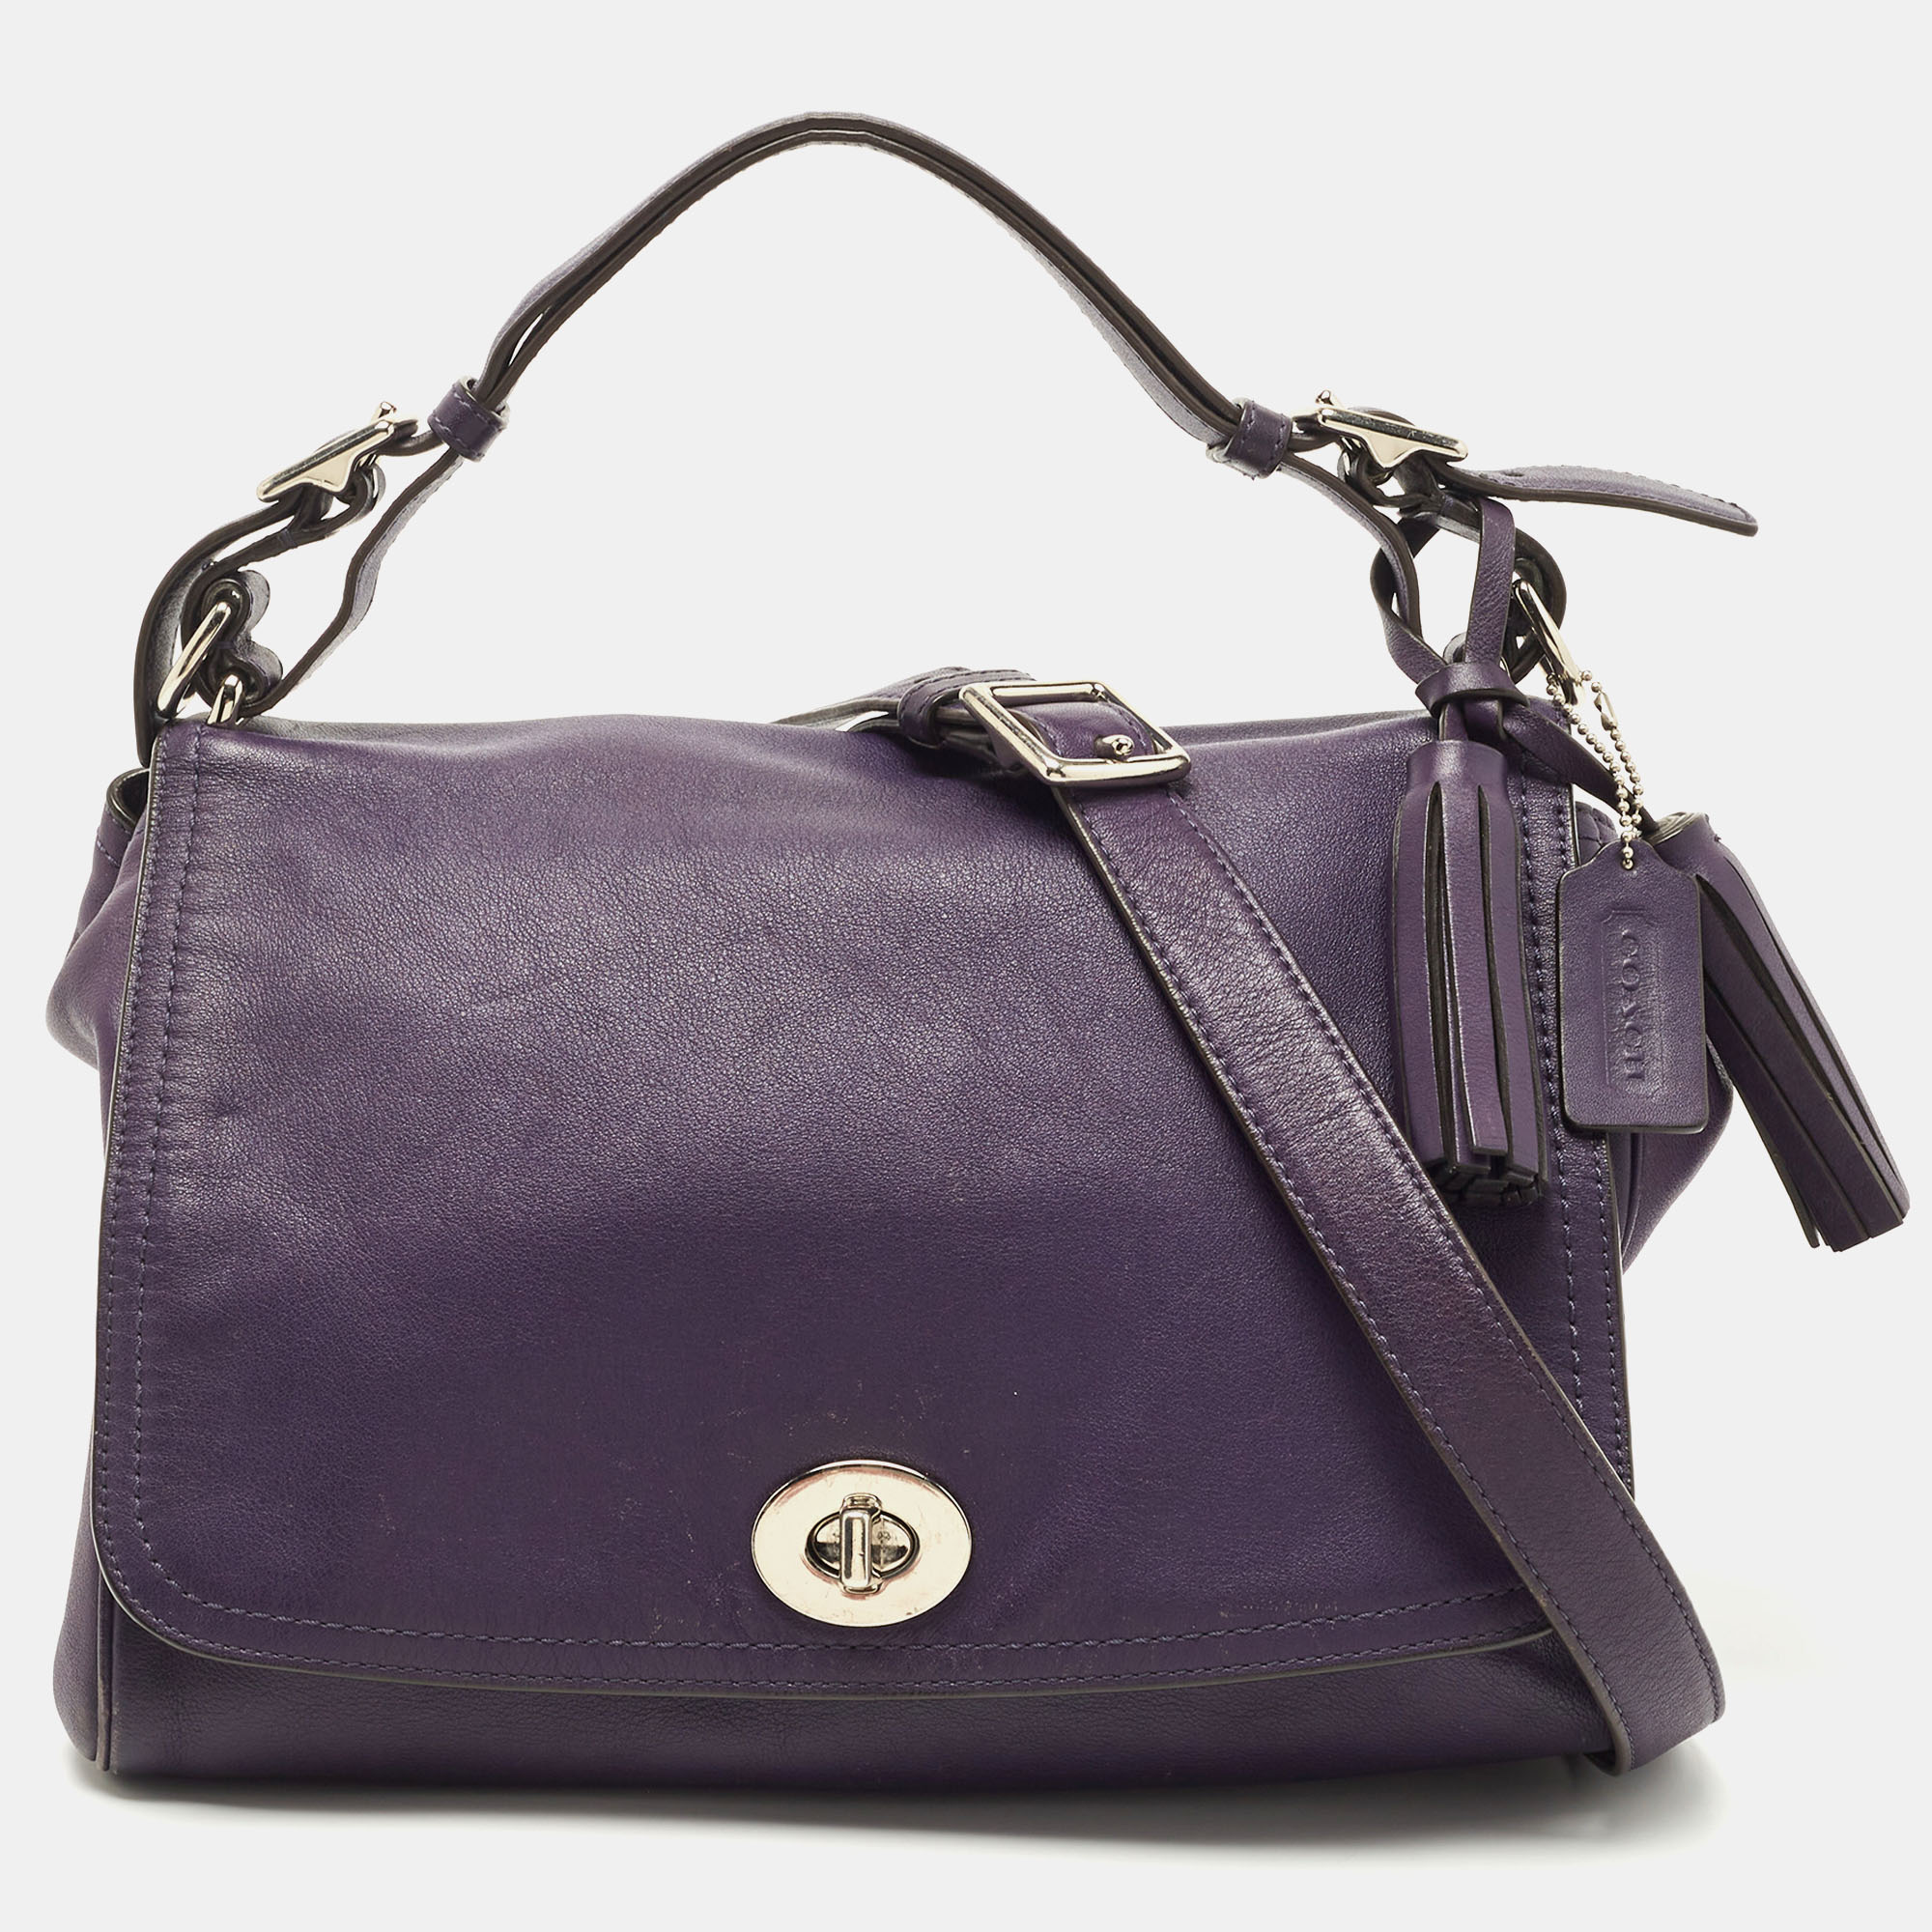 Pre-owned Coach Purple Leather Romy Top Handle Bag